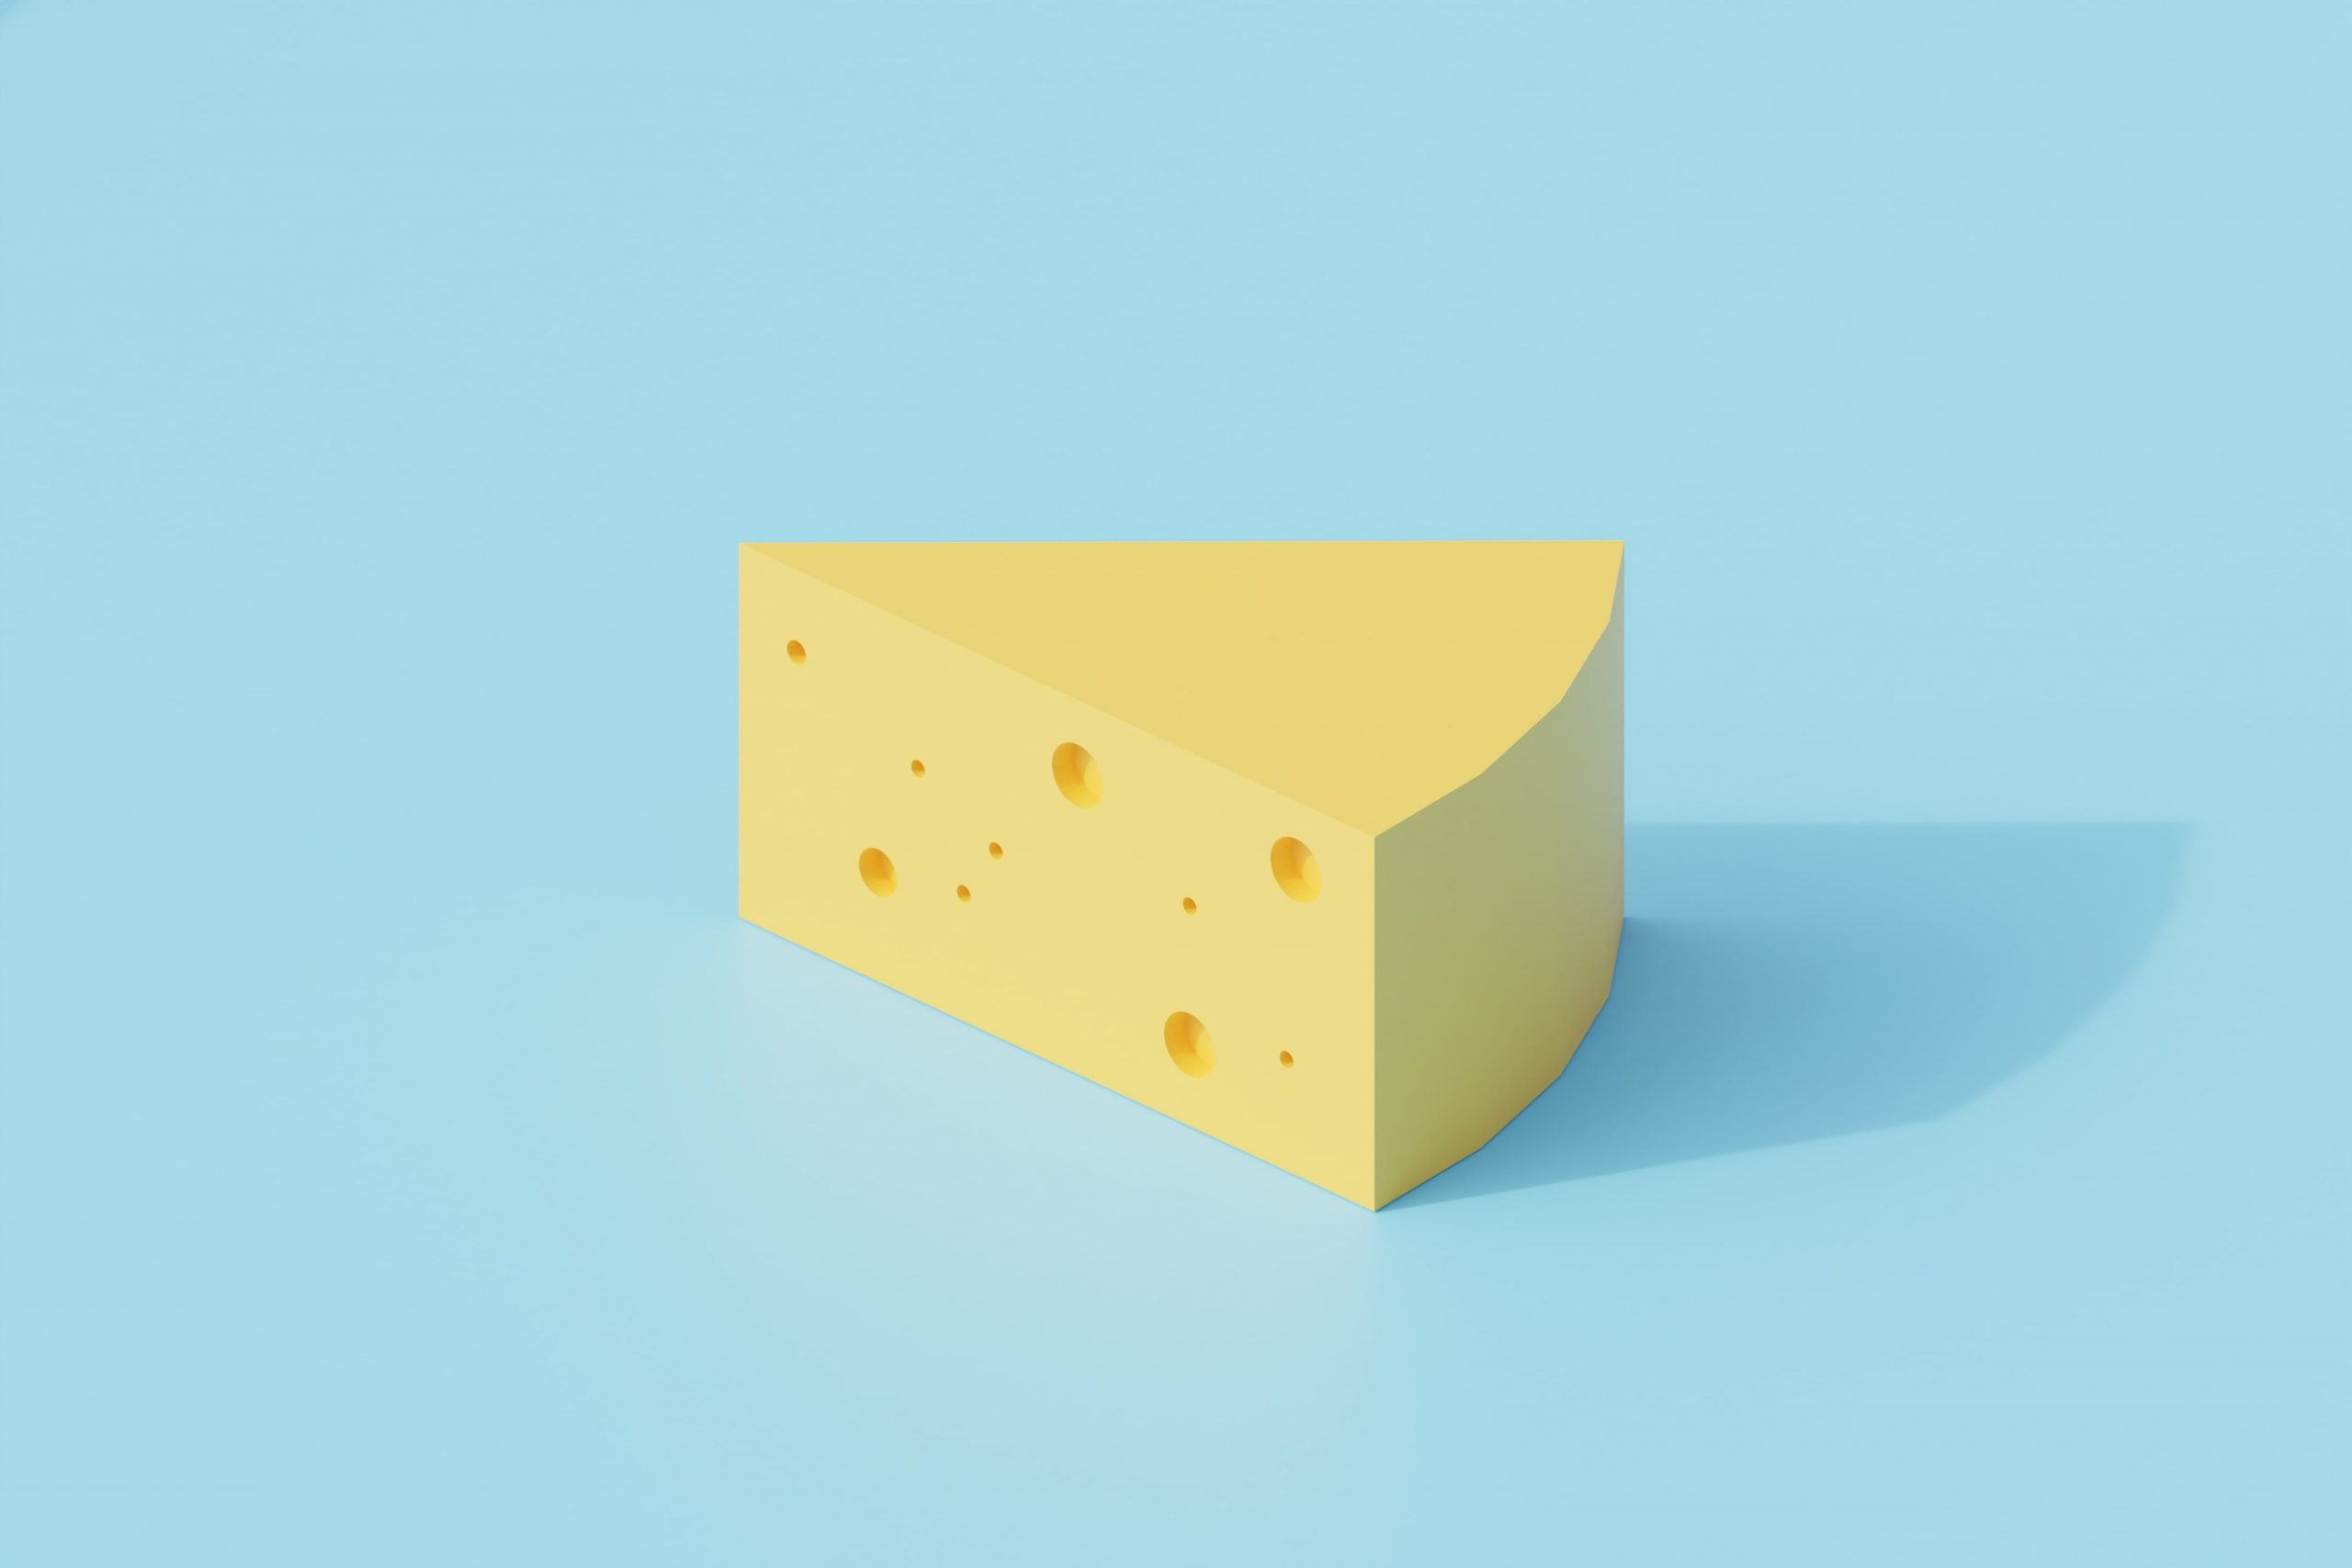 How is 3D-printed cheese made?